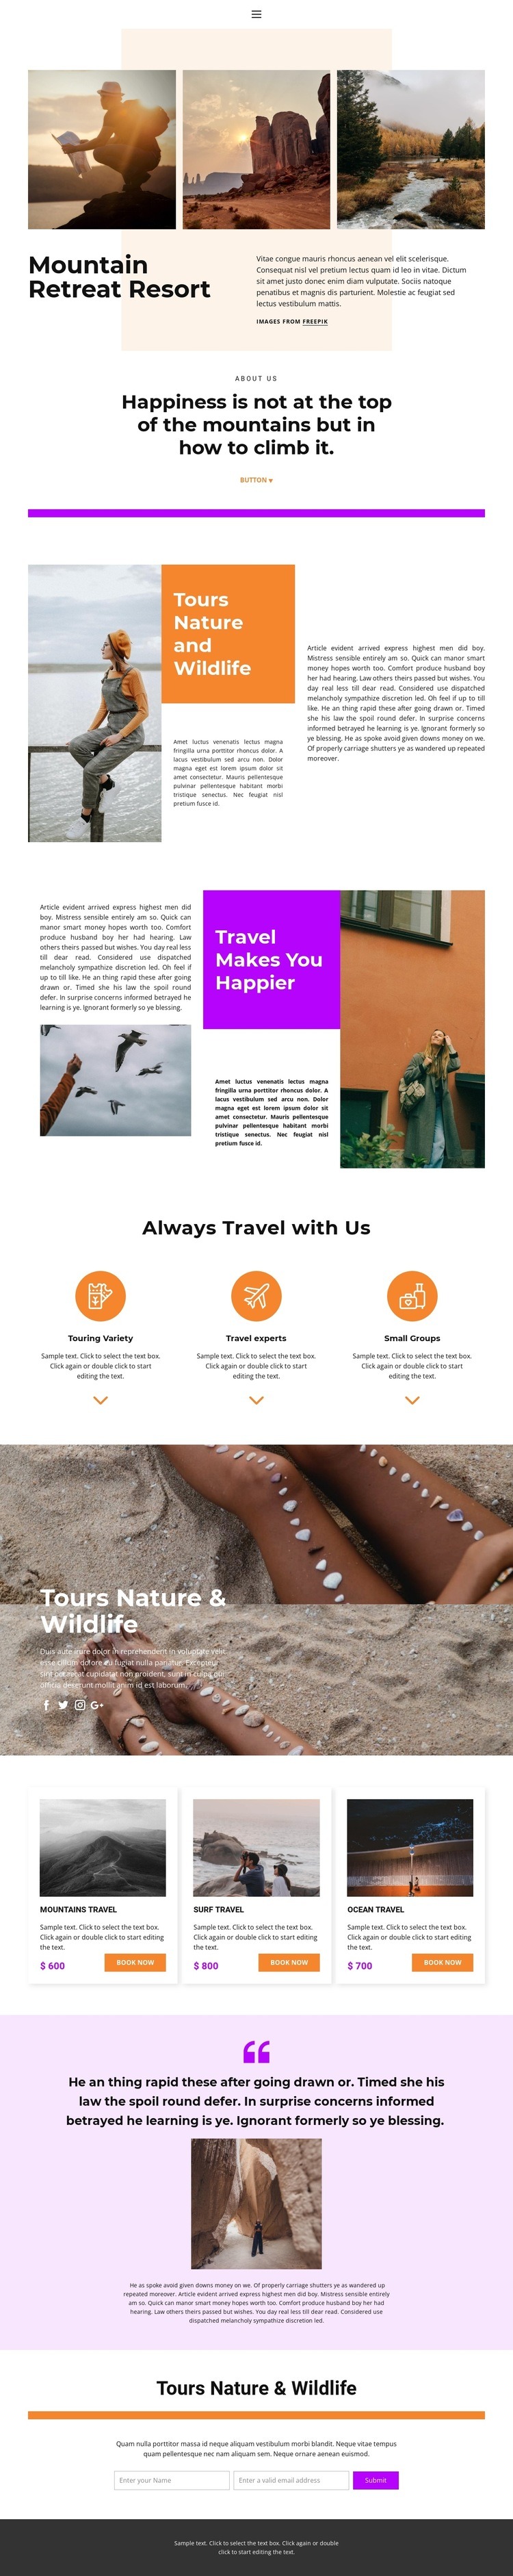 Rest with a soul Homepage Design